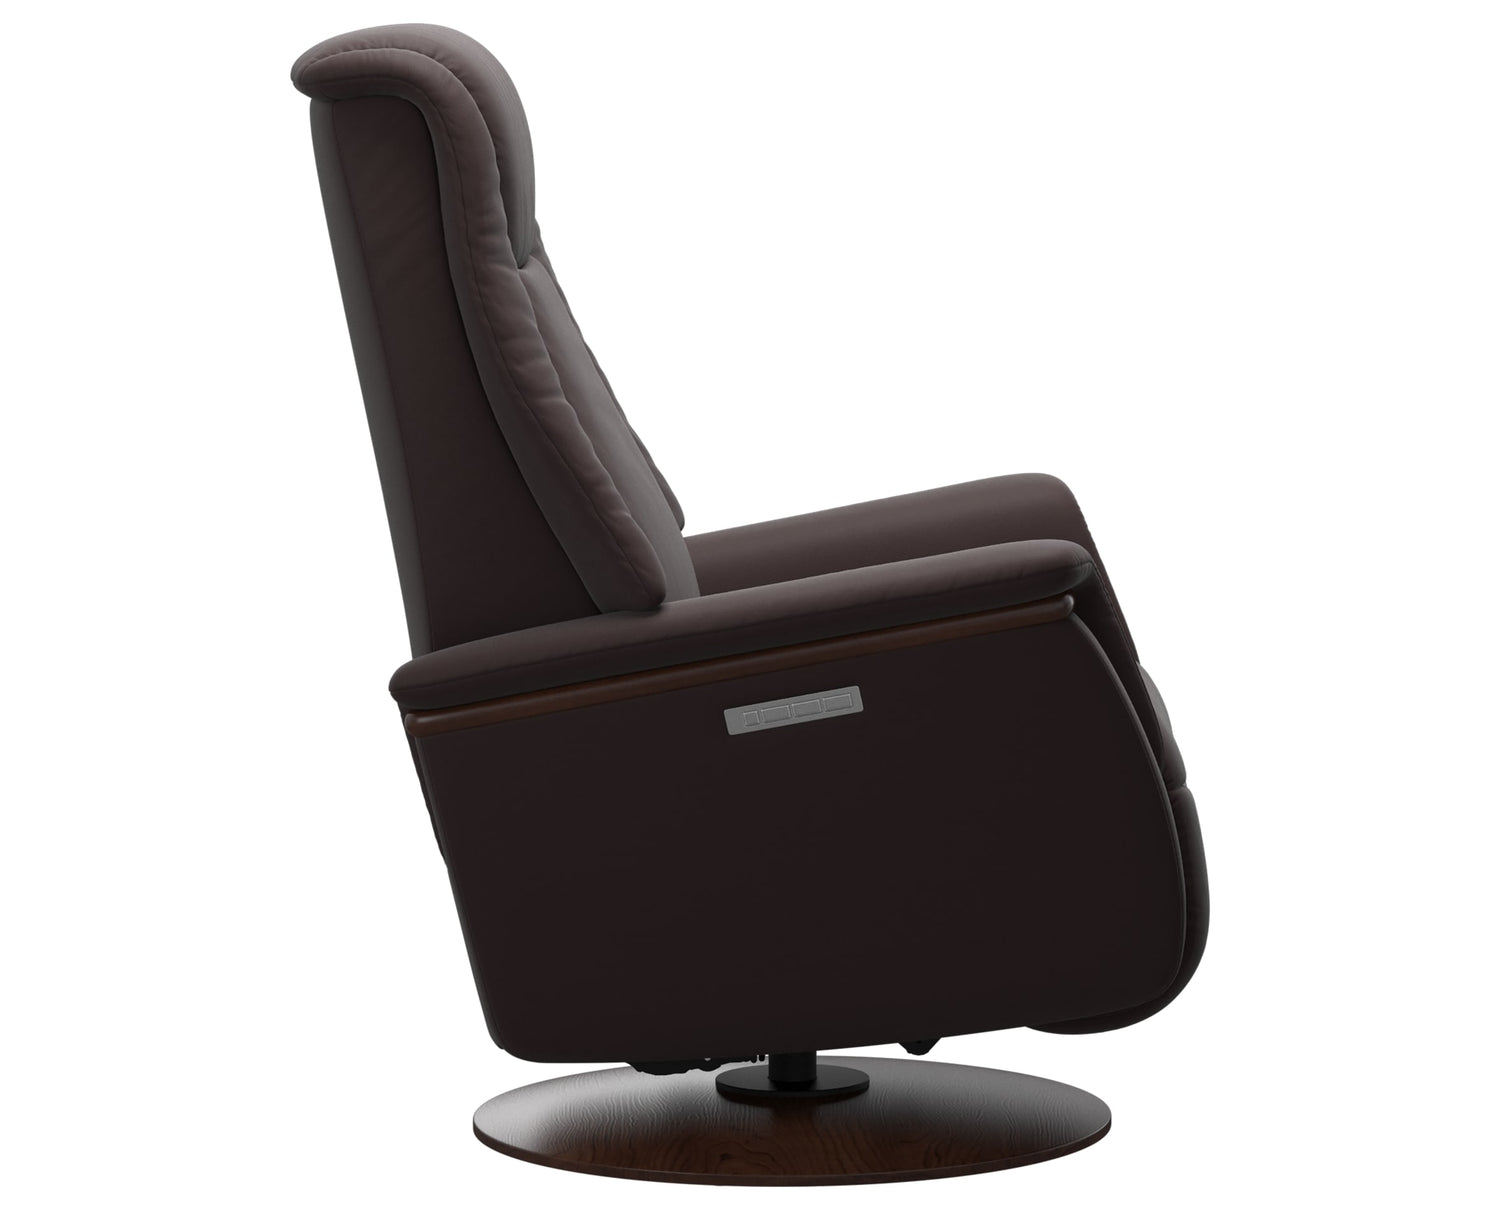 Paloma Leather Chocolate S/M/L & Brown Base/Arm Trim | Stressless Max Recliner | Valley Ridge Furniture